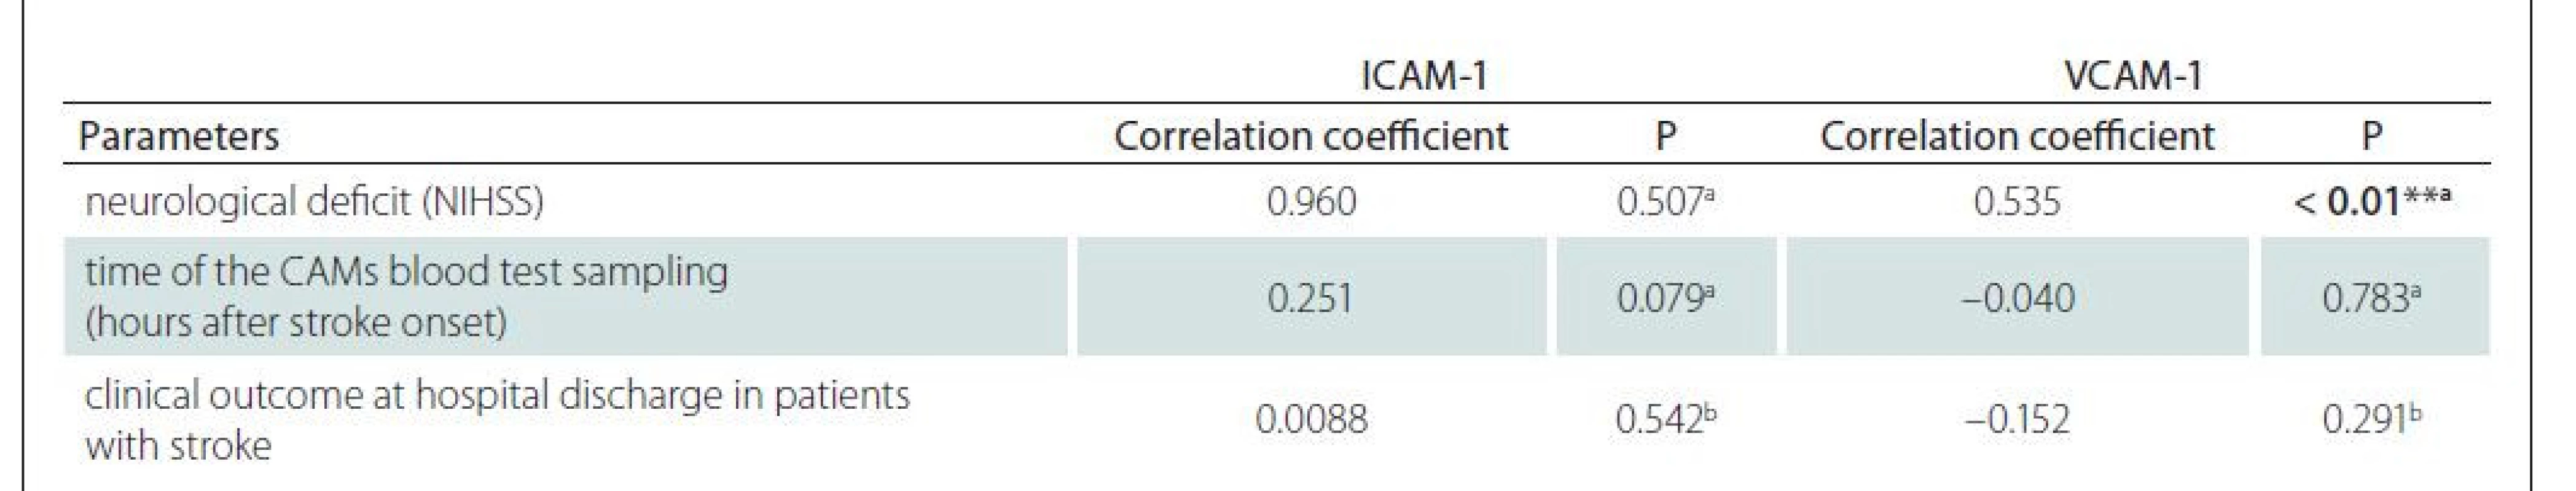 Results of the correlation analysis for the relationship between ICAM-1 and VCAM-1 levels with neurological deficits, CAMs
blood test time, and clinical outcome at hospital discharge in patients with ischemic stroke.